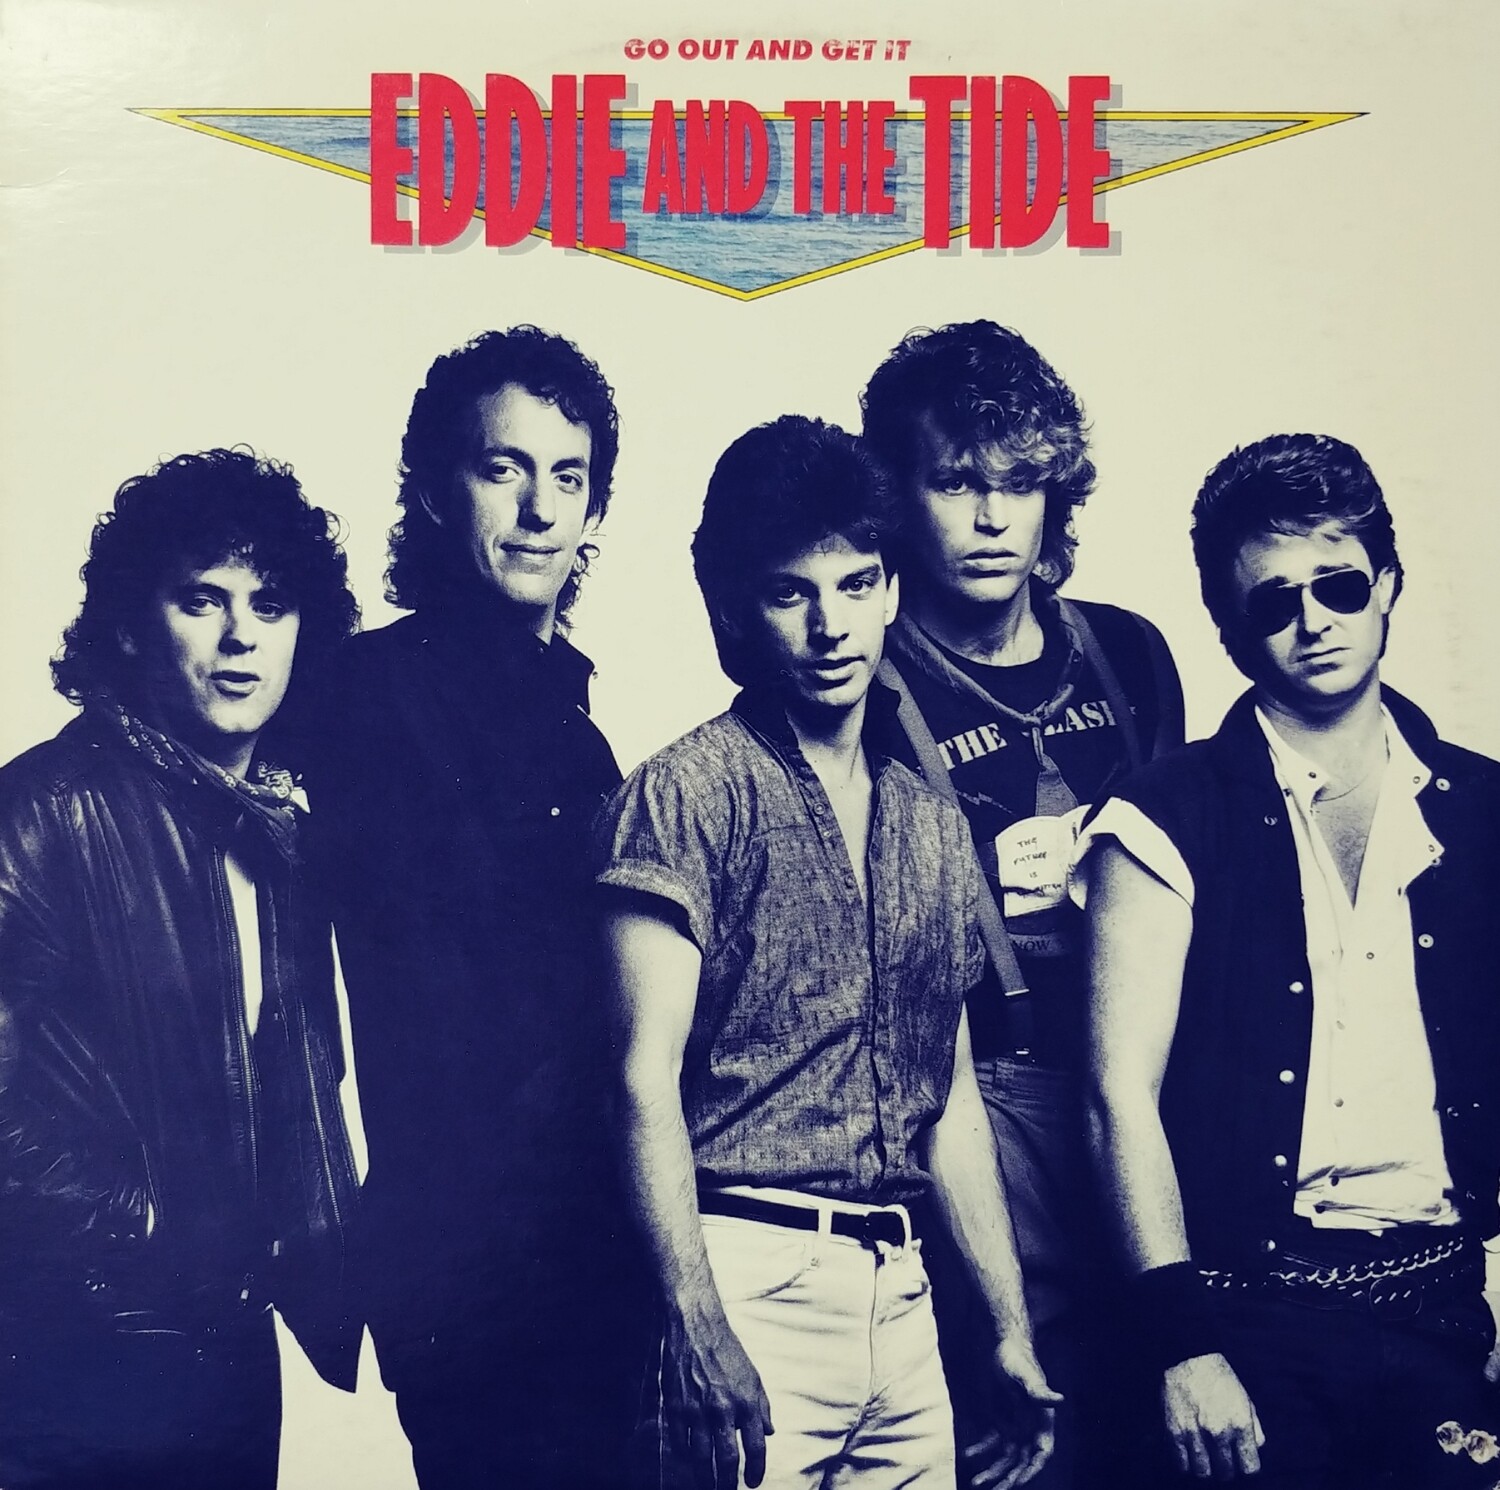 Eddie and The Tide - Go out and get it